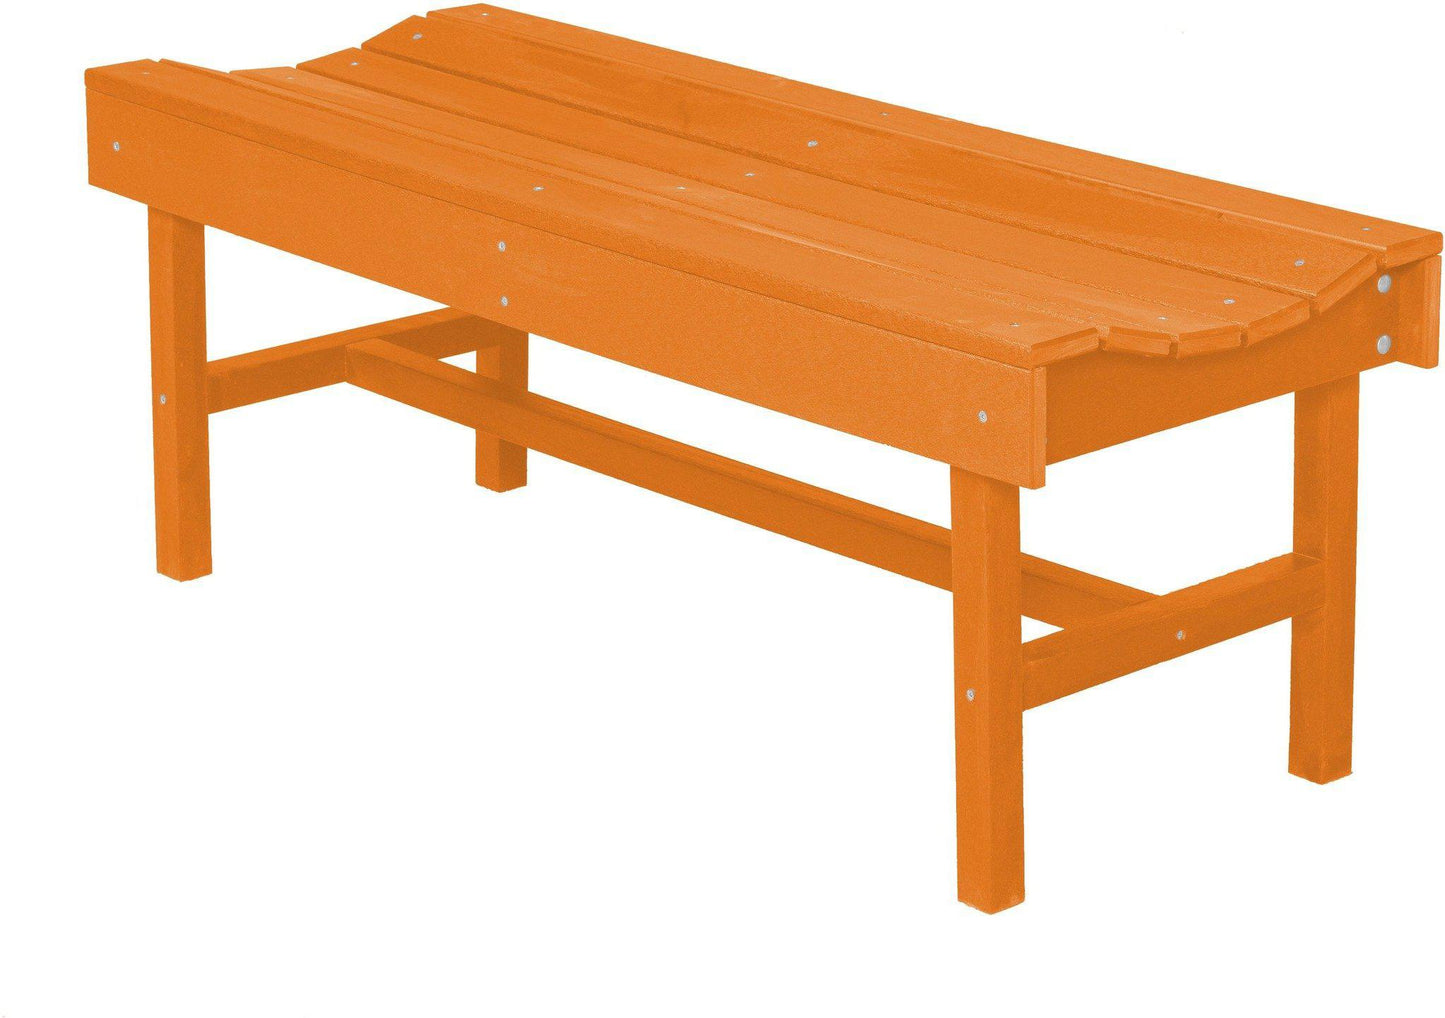 Wildridge Classic Outdoor Recycled Plastic Vineyard Bench - LEAD TIME TO SHIP 3 WEEKS